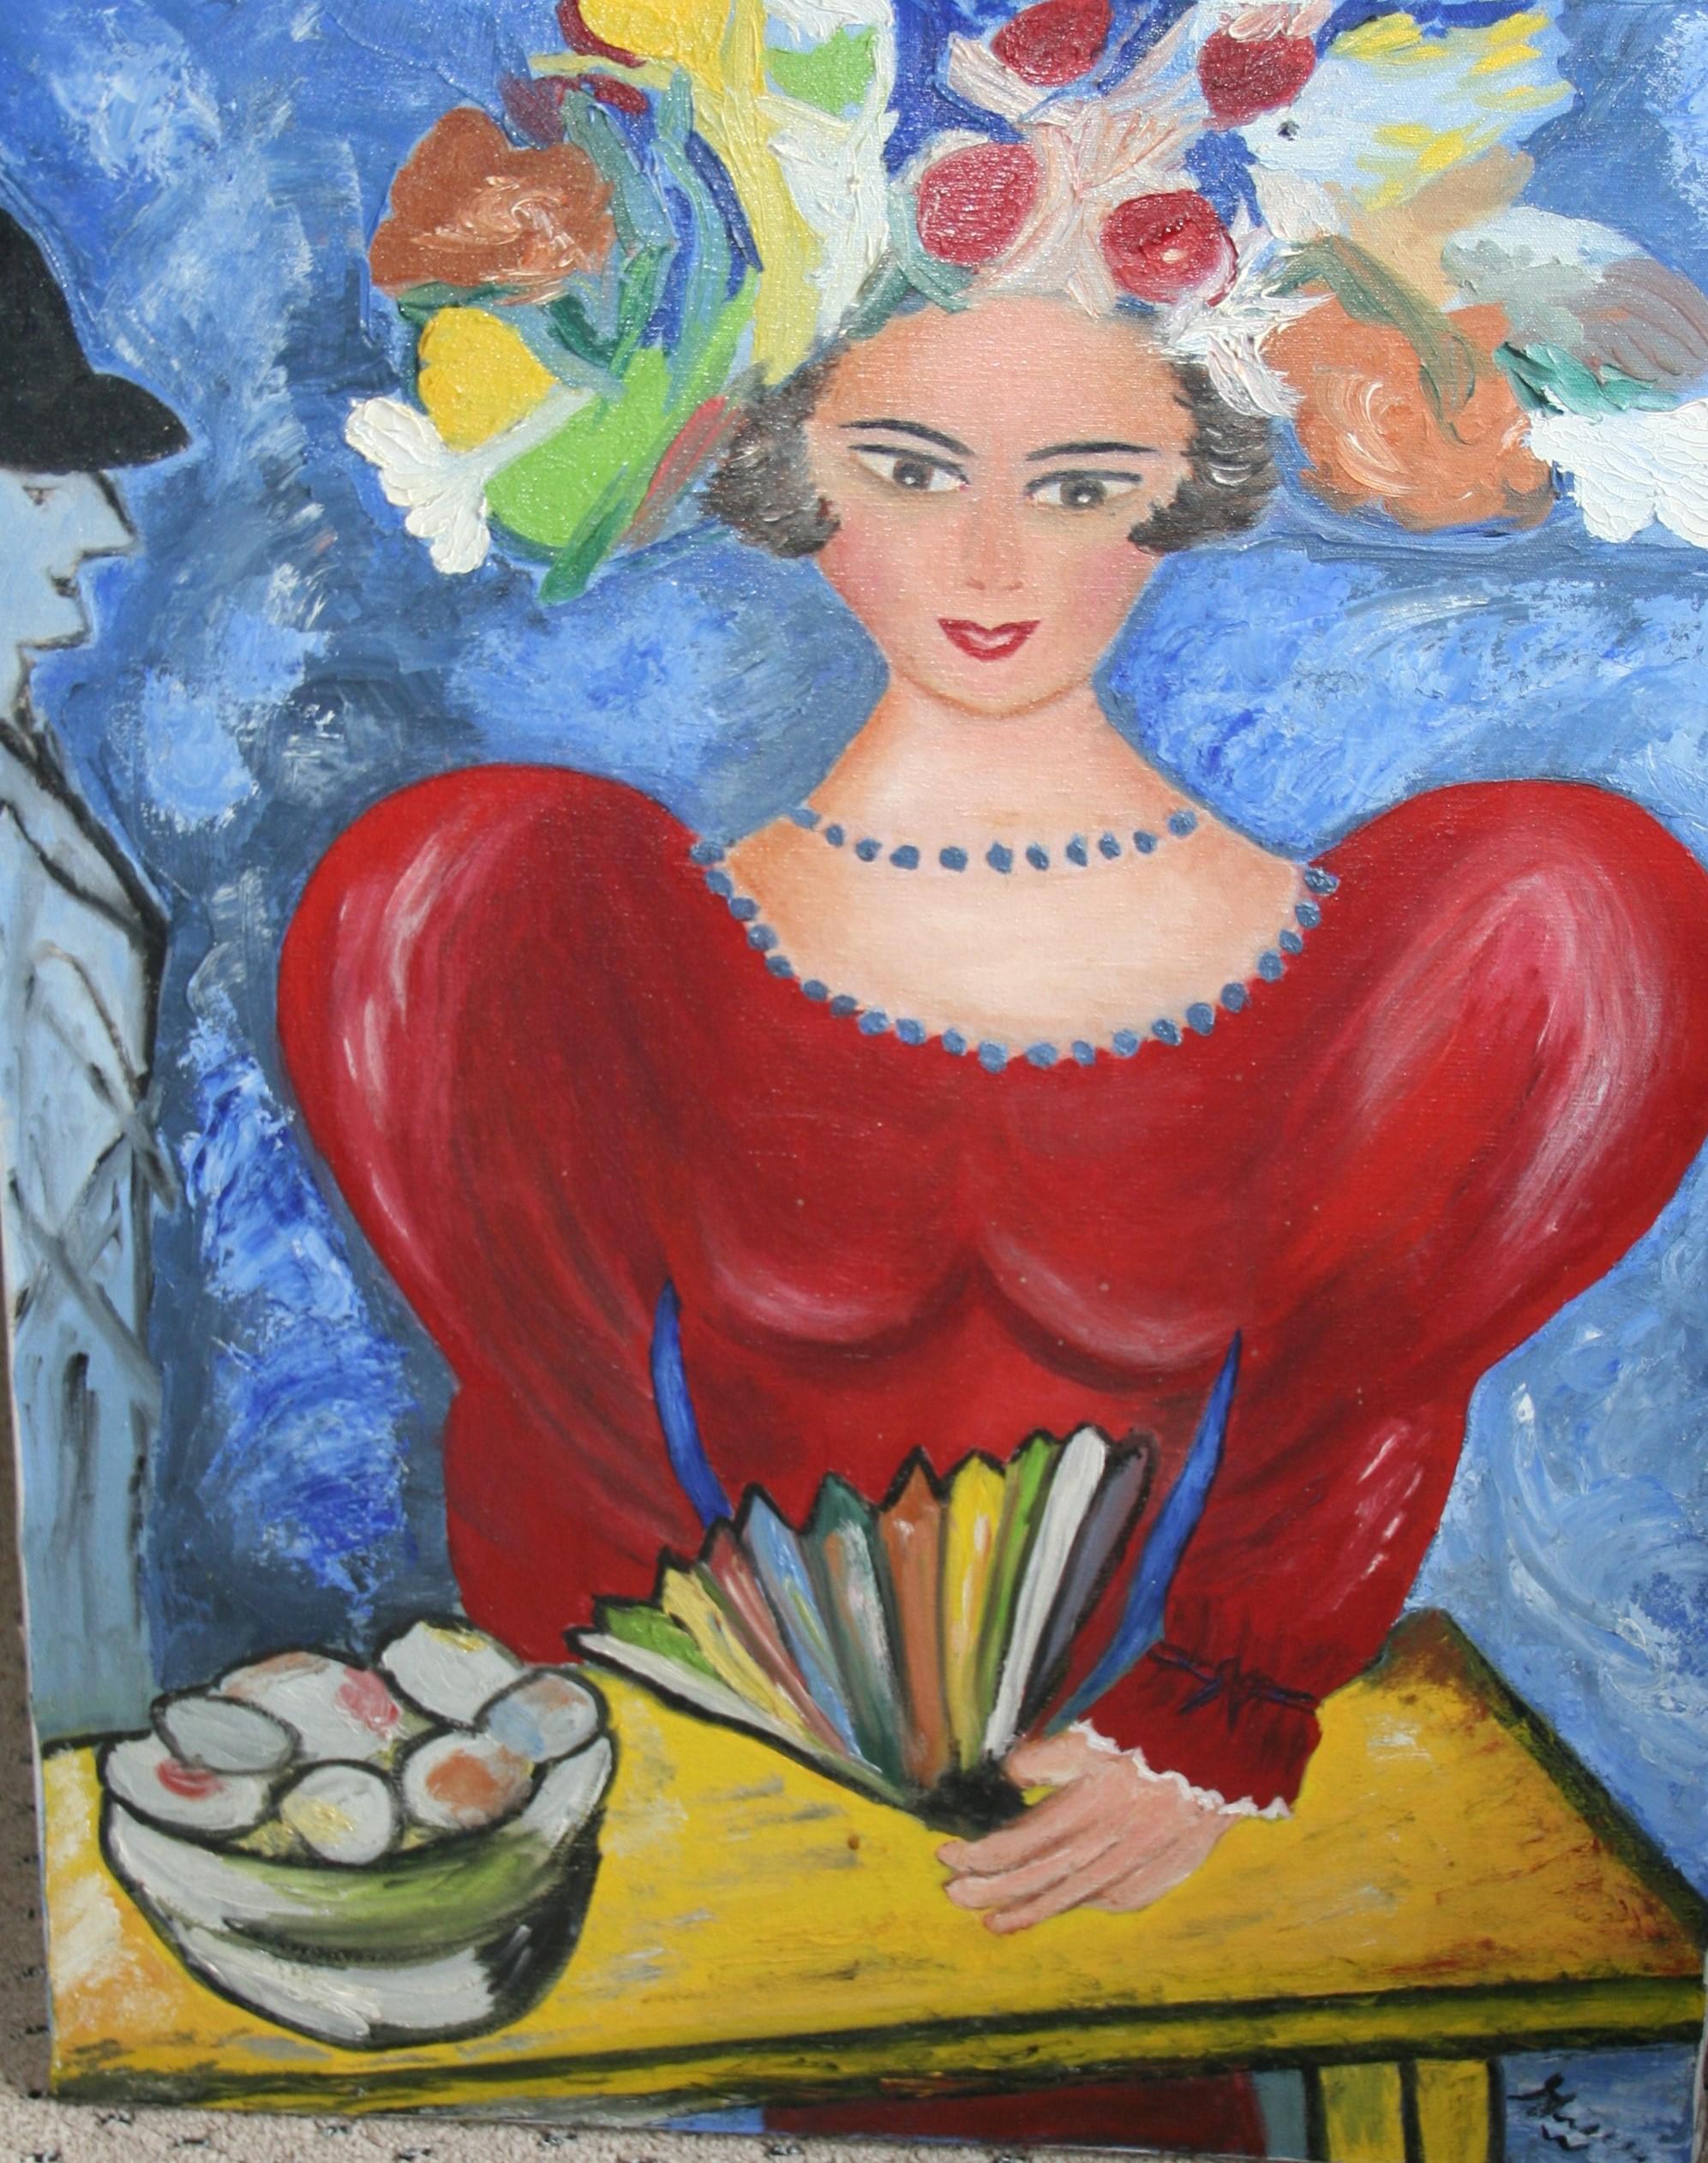 4071 Colorful Fauvist painting of a woman in a red dress with
flowered hat being admired by a passerby
Unframed